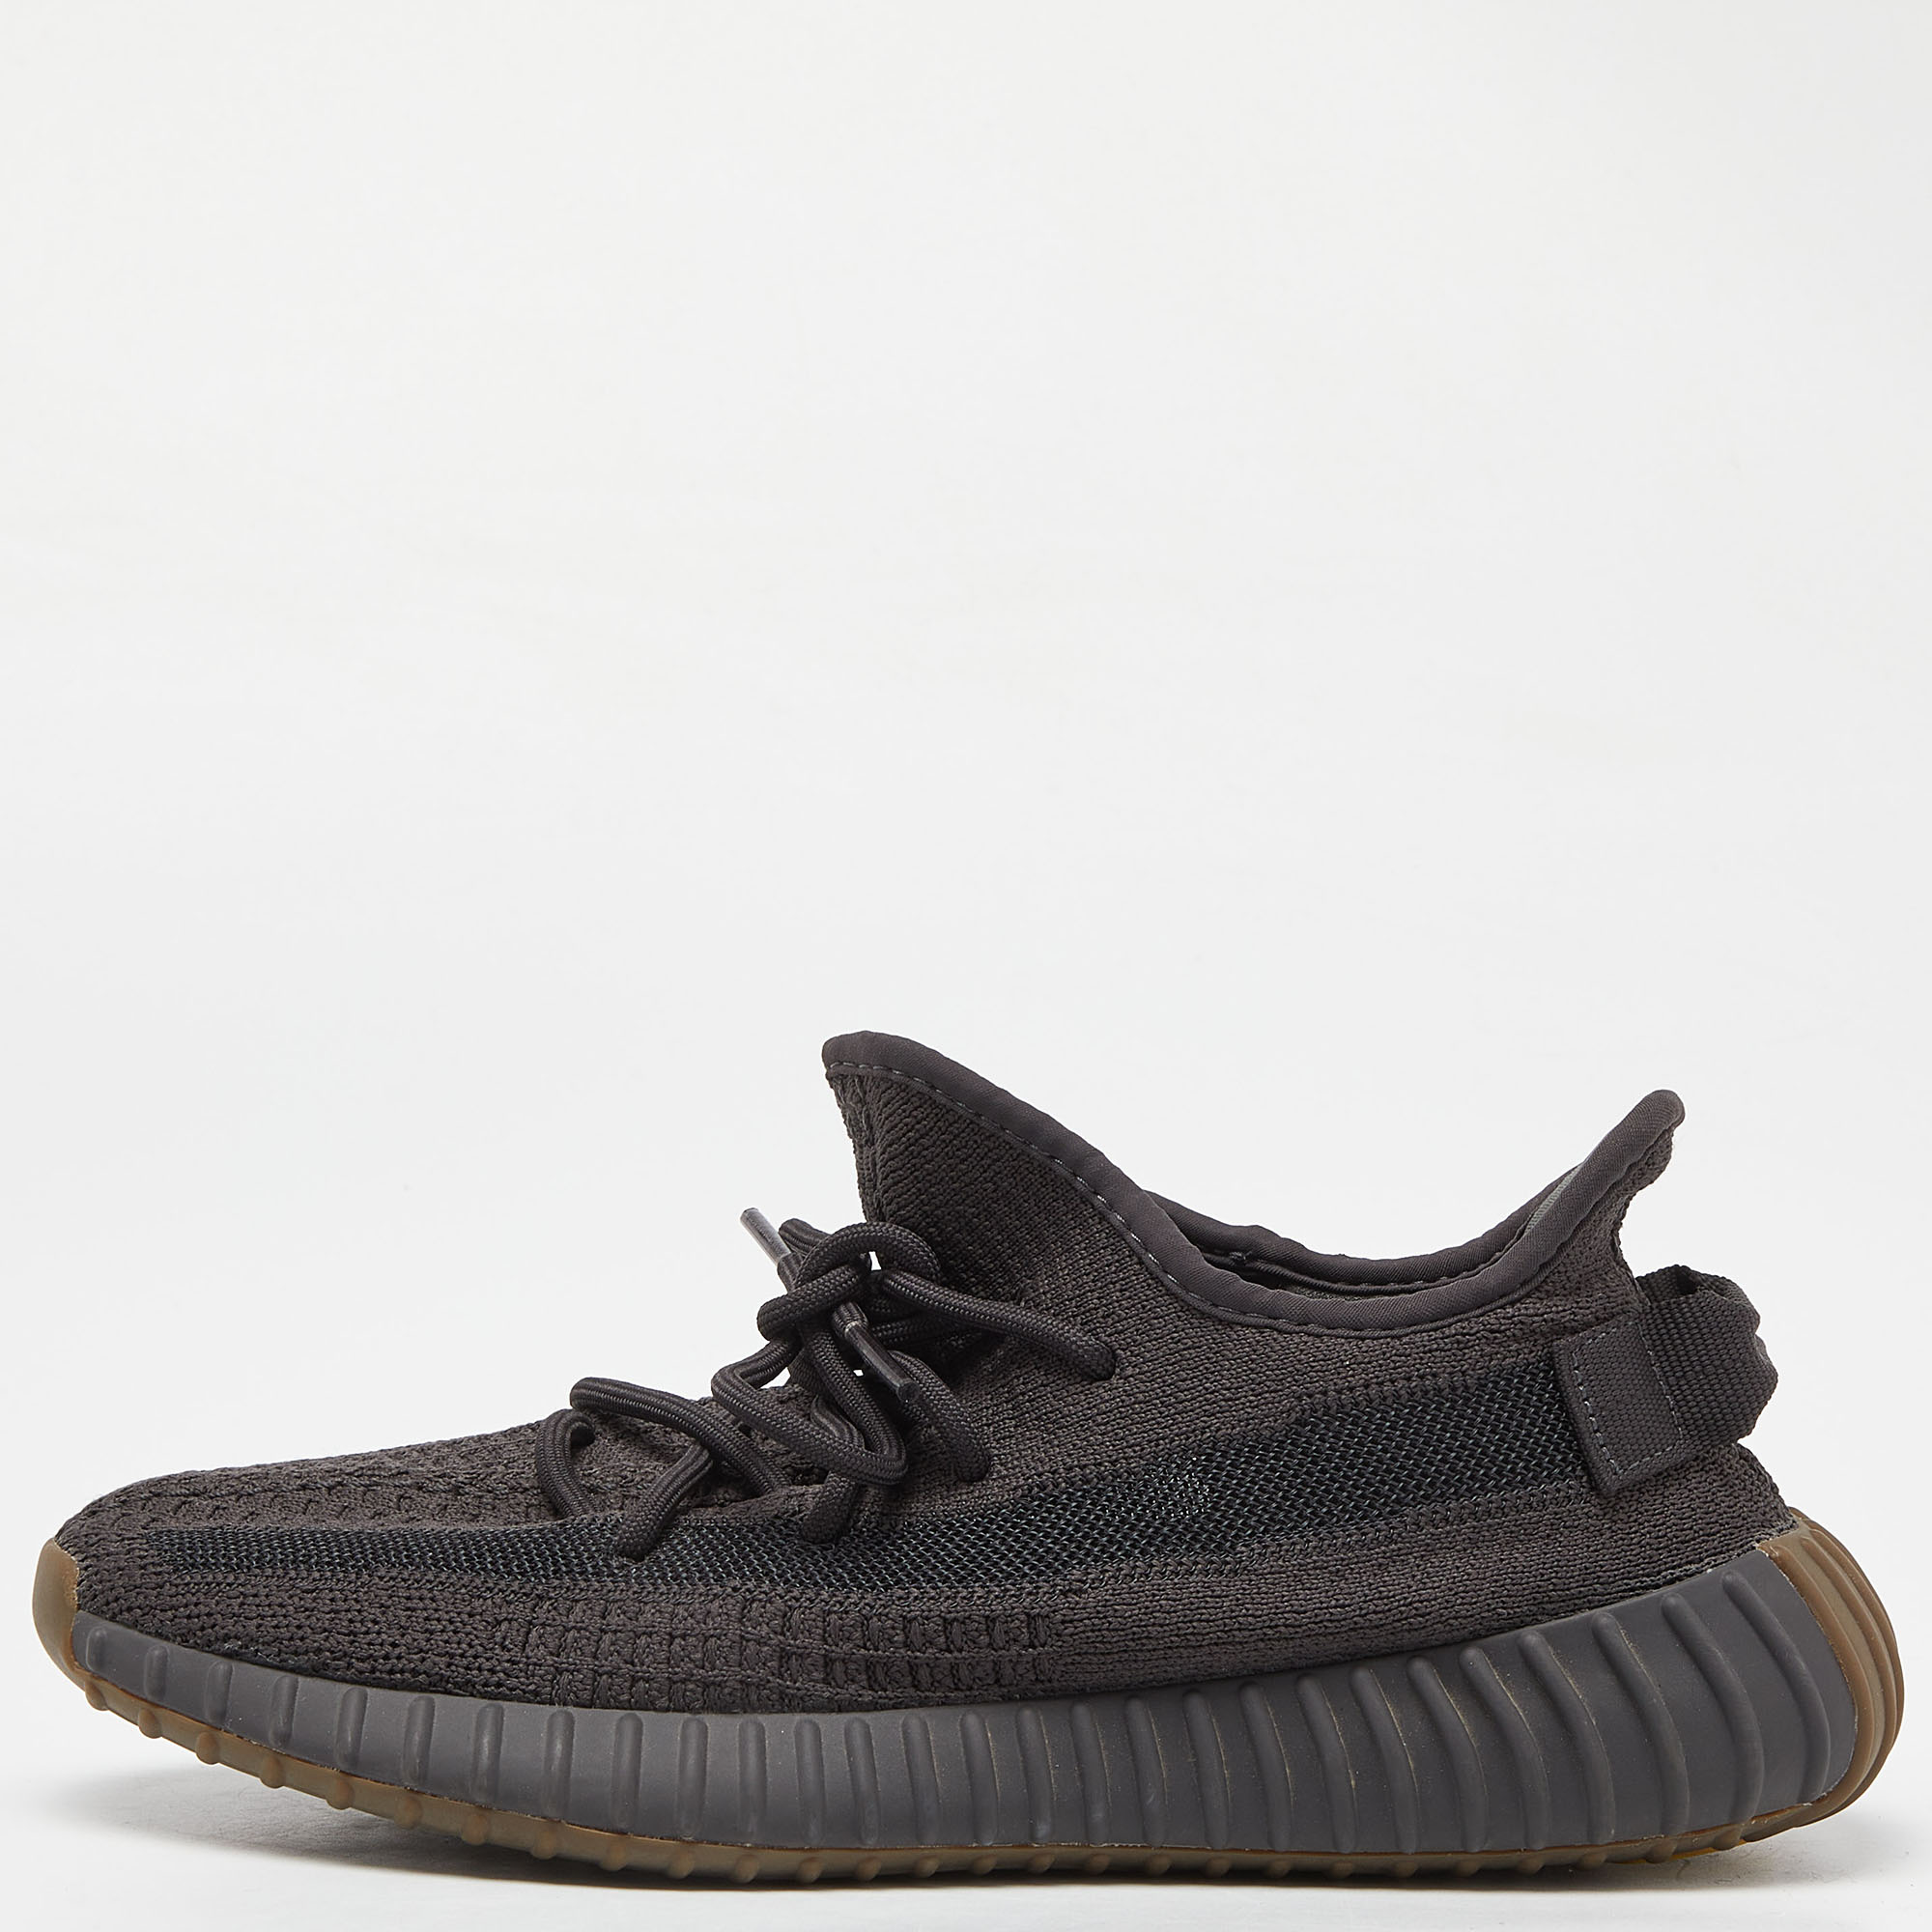 

Yeezy x Adidas Black Fabric Boost 350 V2 Cinder Sneakers Size 40 2/3